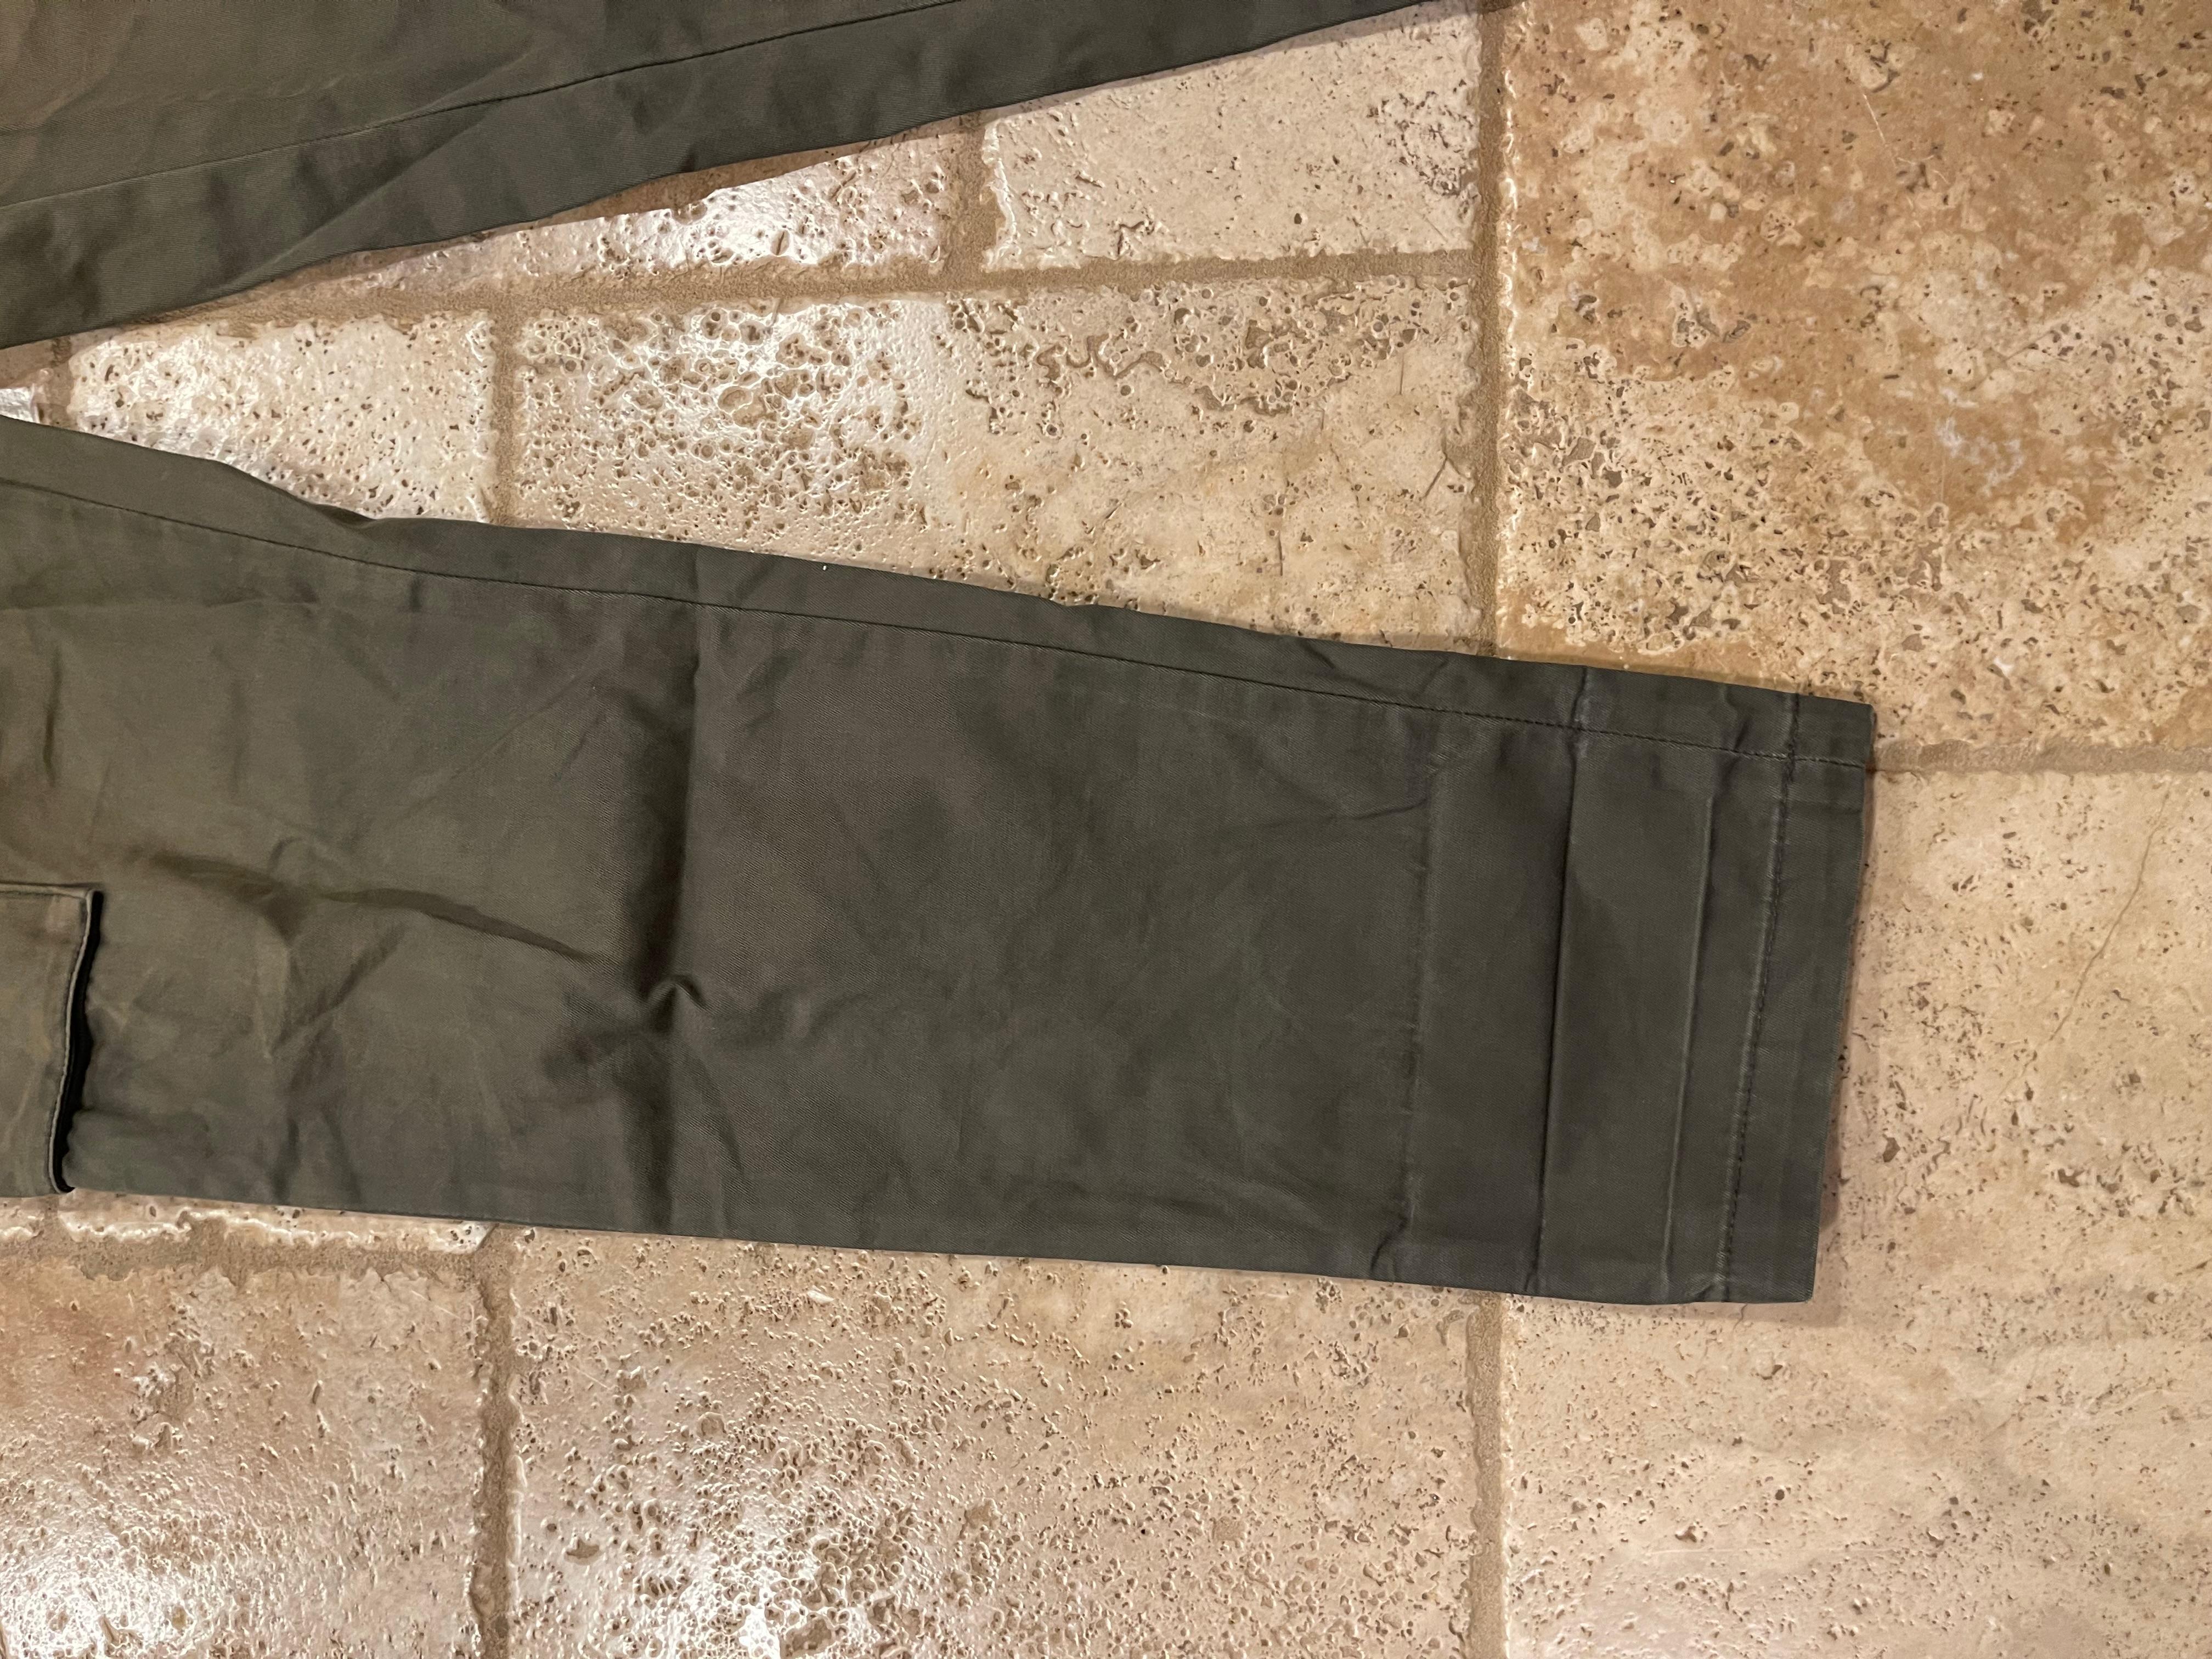 Maison Margiela Olive Cargo Pants
John Galliano's Spring/Summer 2017 Collection
Size 50
Great Condition

Measurements:
Waist: 17”
Inseam: 31”
Leg opening: 7”
Front rise: 11”

ALL SALES ARE FINAL.